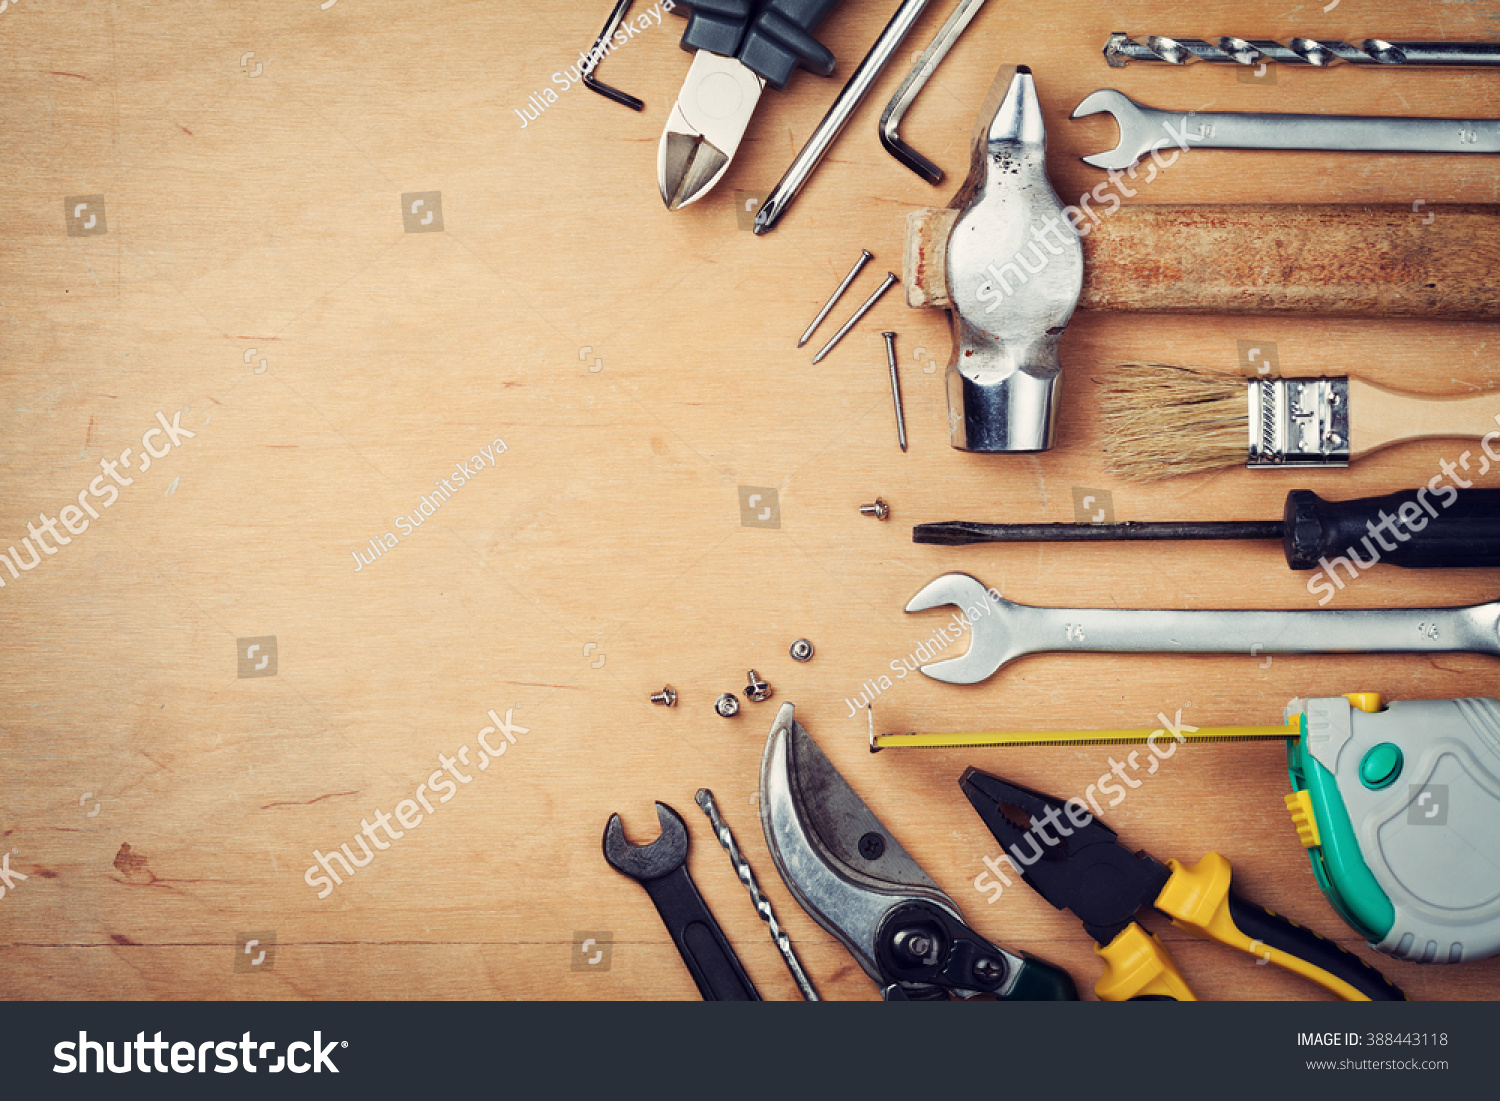 Working tools on wooden rustic background. top view #388443118